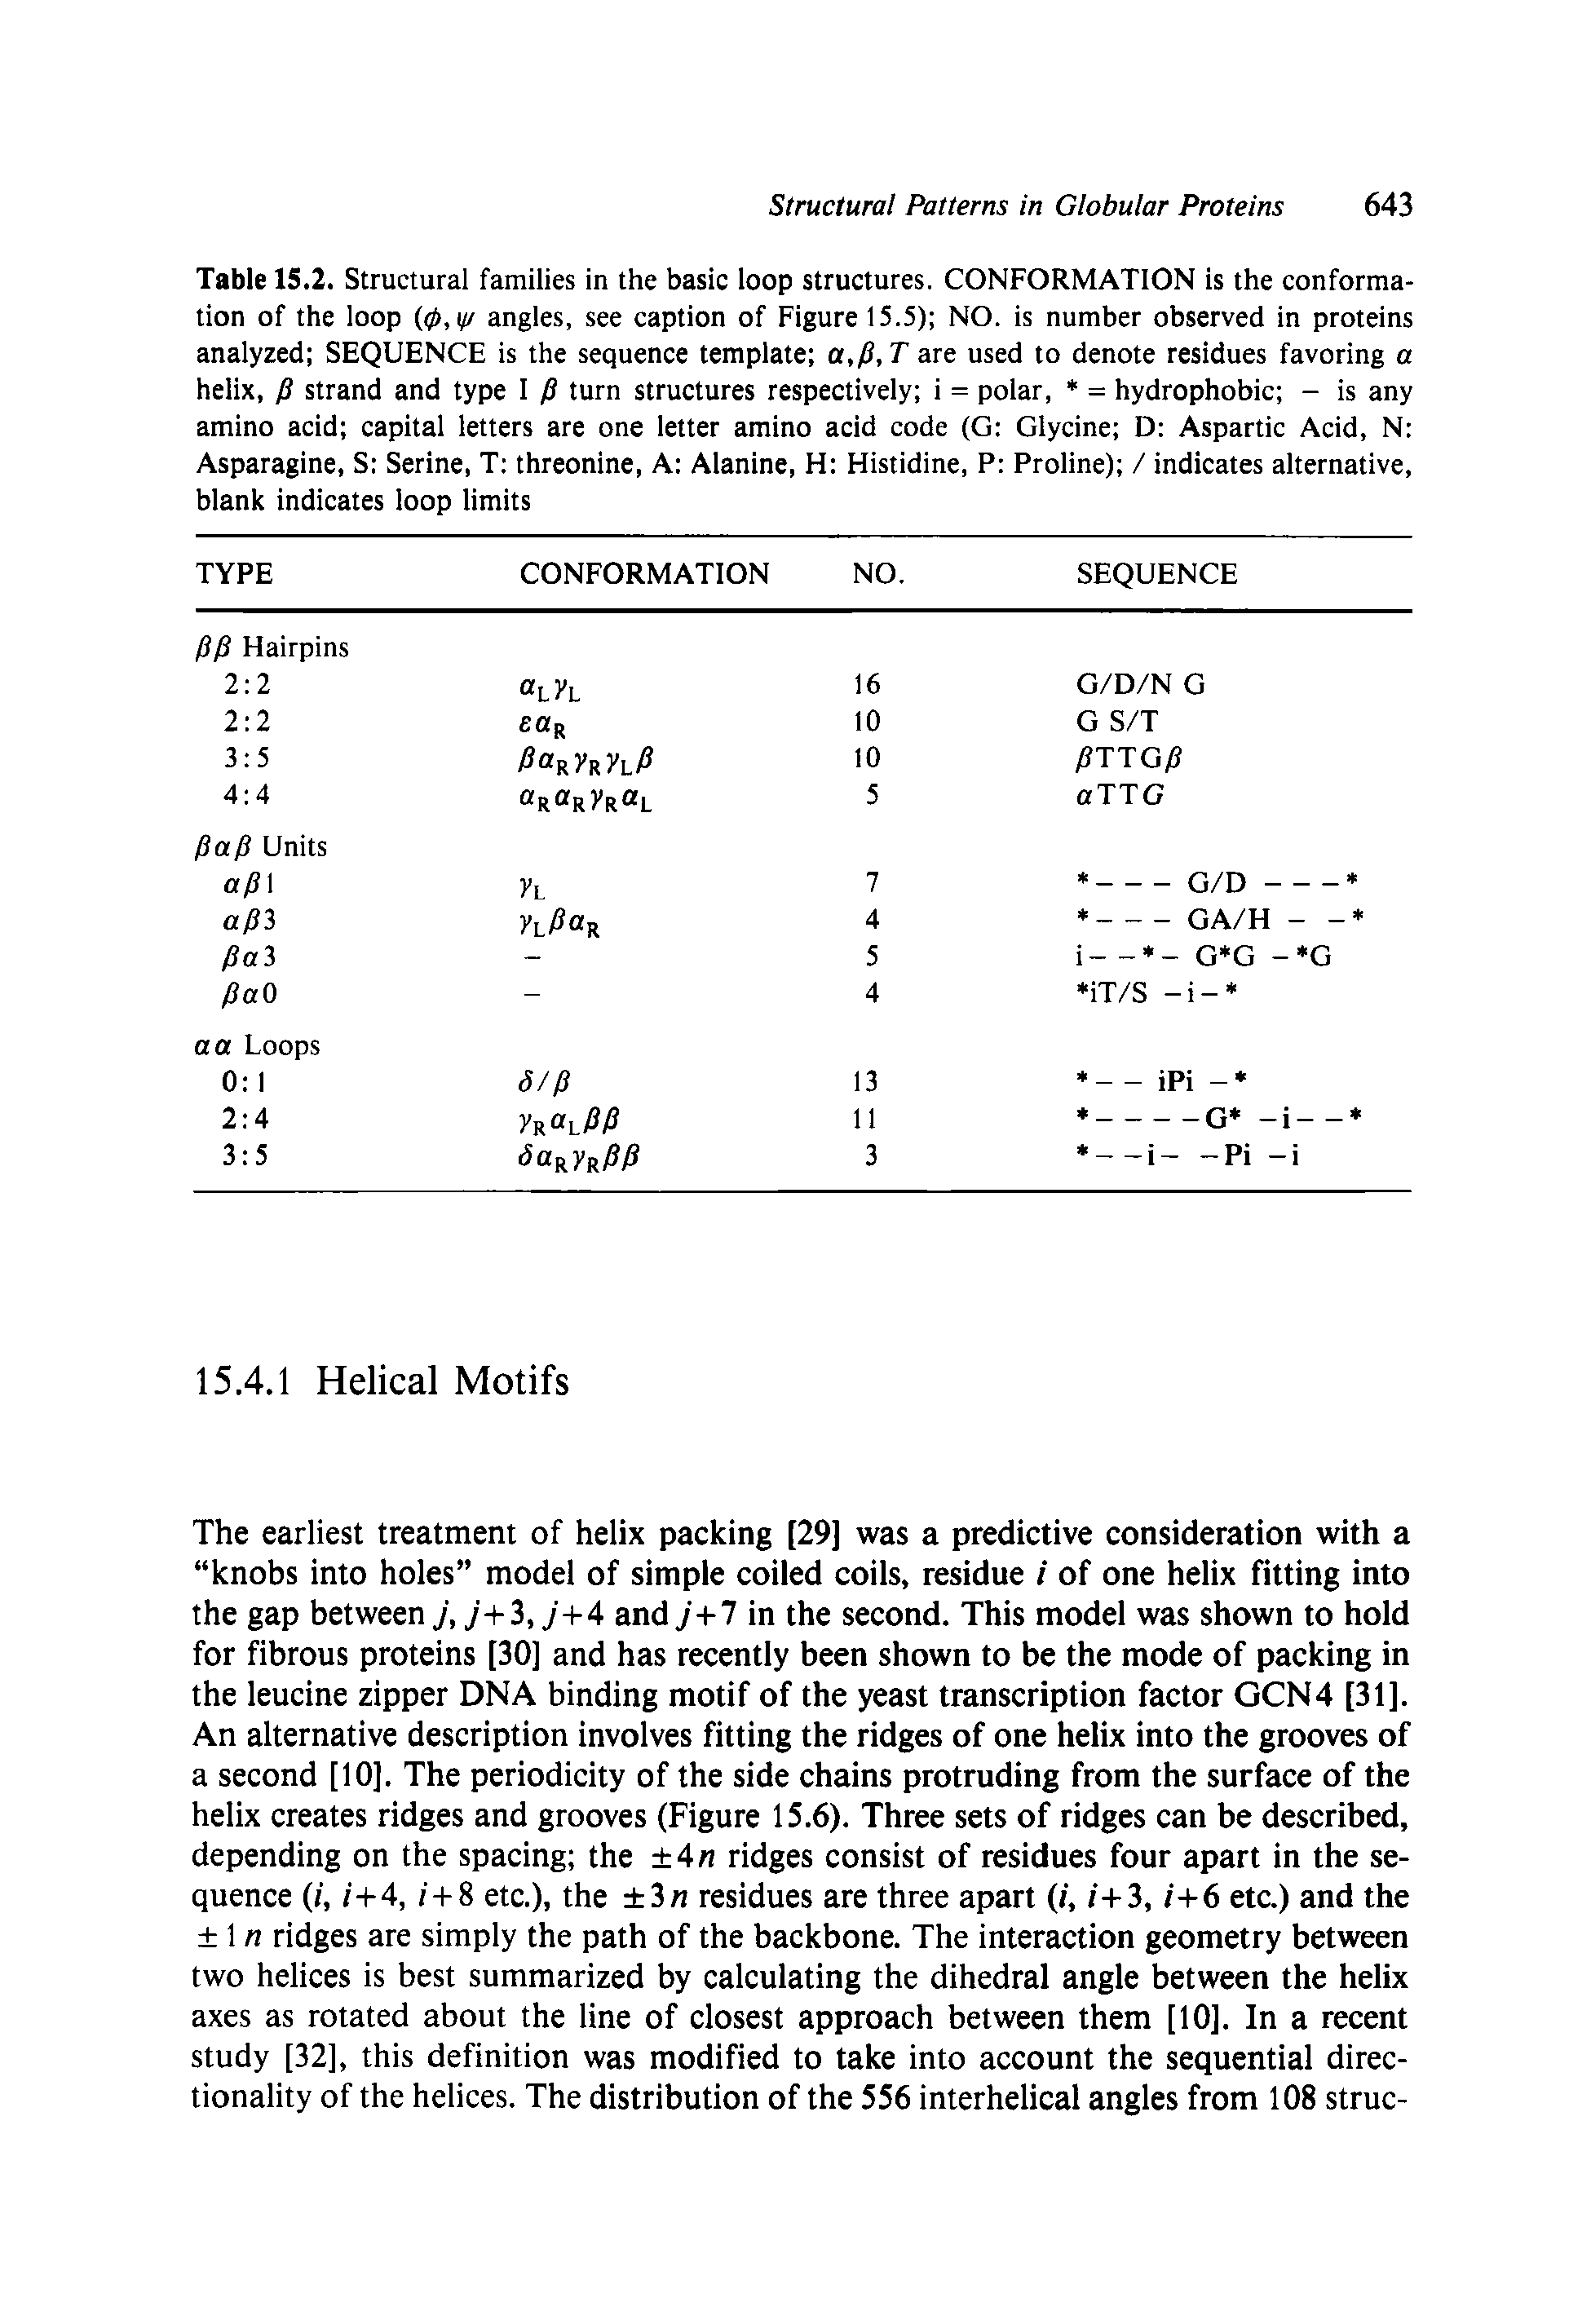 Table 15.2. Structural families in the basic loop structures. CONFORMATION is the conformation of the loop (0, ((/ angles, see caption of Figure 15.5) NO. is number observed in proteins analyzed SEQUENCE is the sequence template a,, T are used to denote residues favoring a helix, P strand and type I P turn structures respectively i = polar, = hydrophobic - is any amino acid capital letters are one letter amino acid code (G Glycine D Aspartic Acid, N Asparagine, S Serine, T threonine, A Alanine, H Histidine, P Proline) / indicates alternative, blank indicates loop limits...